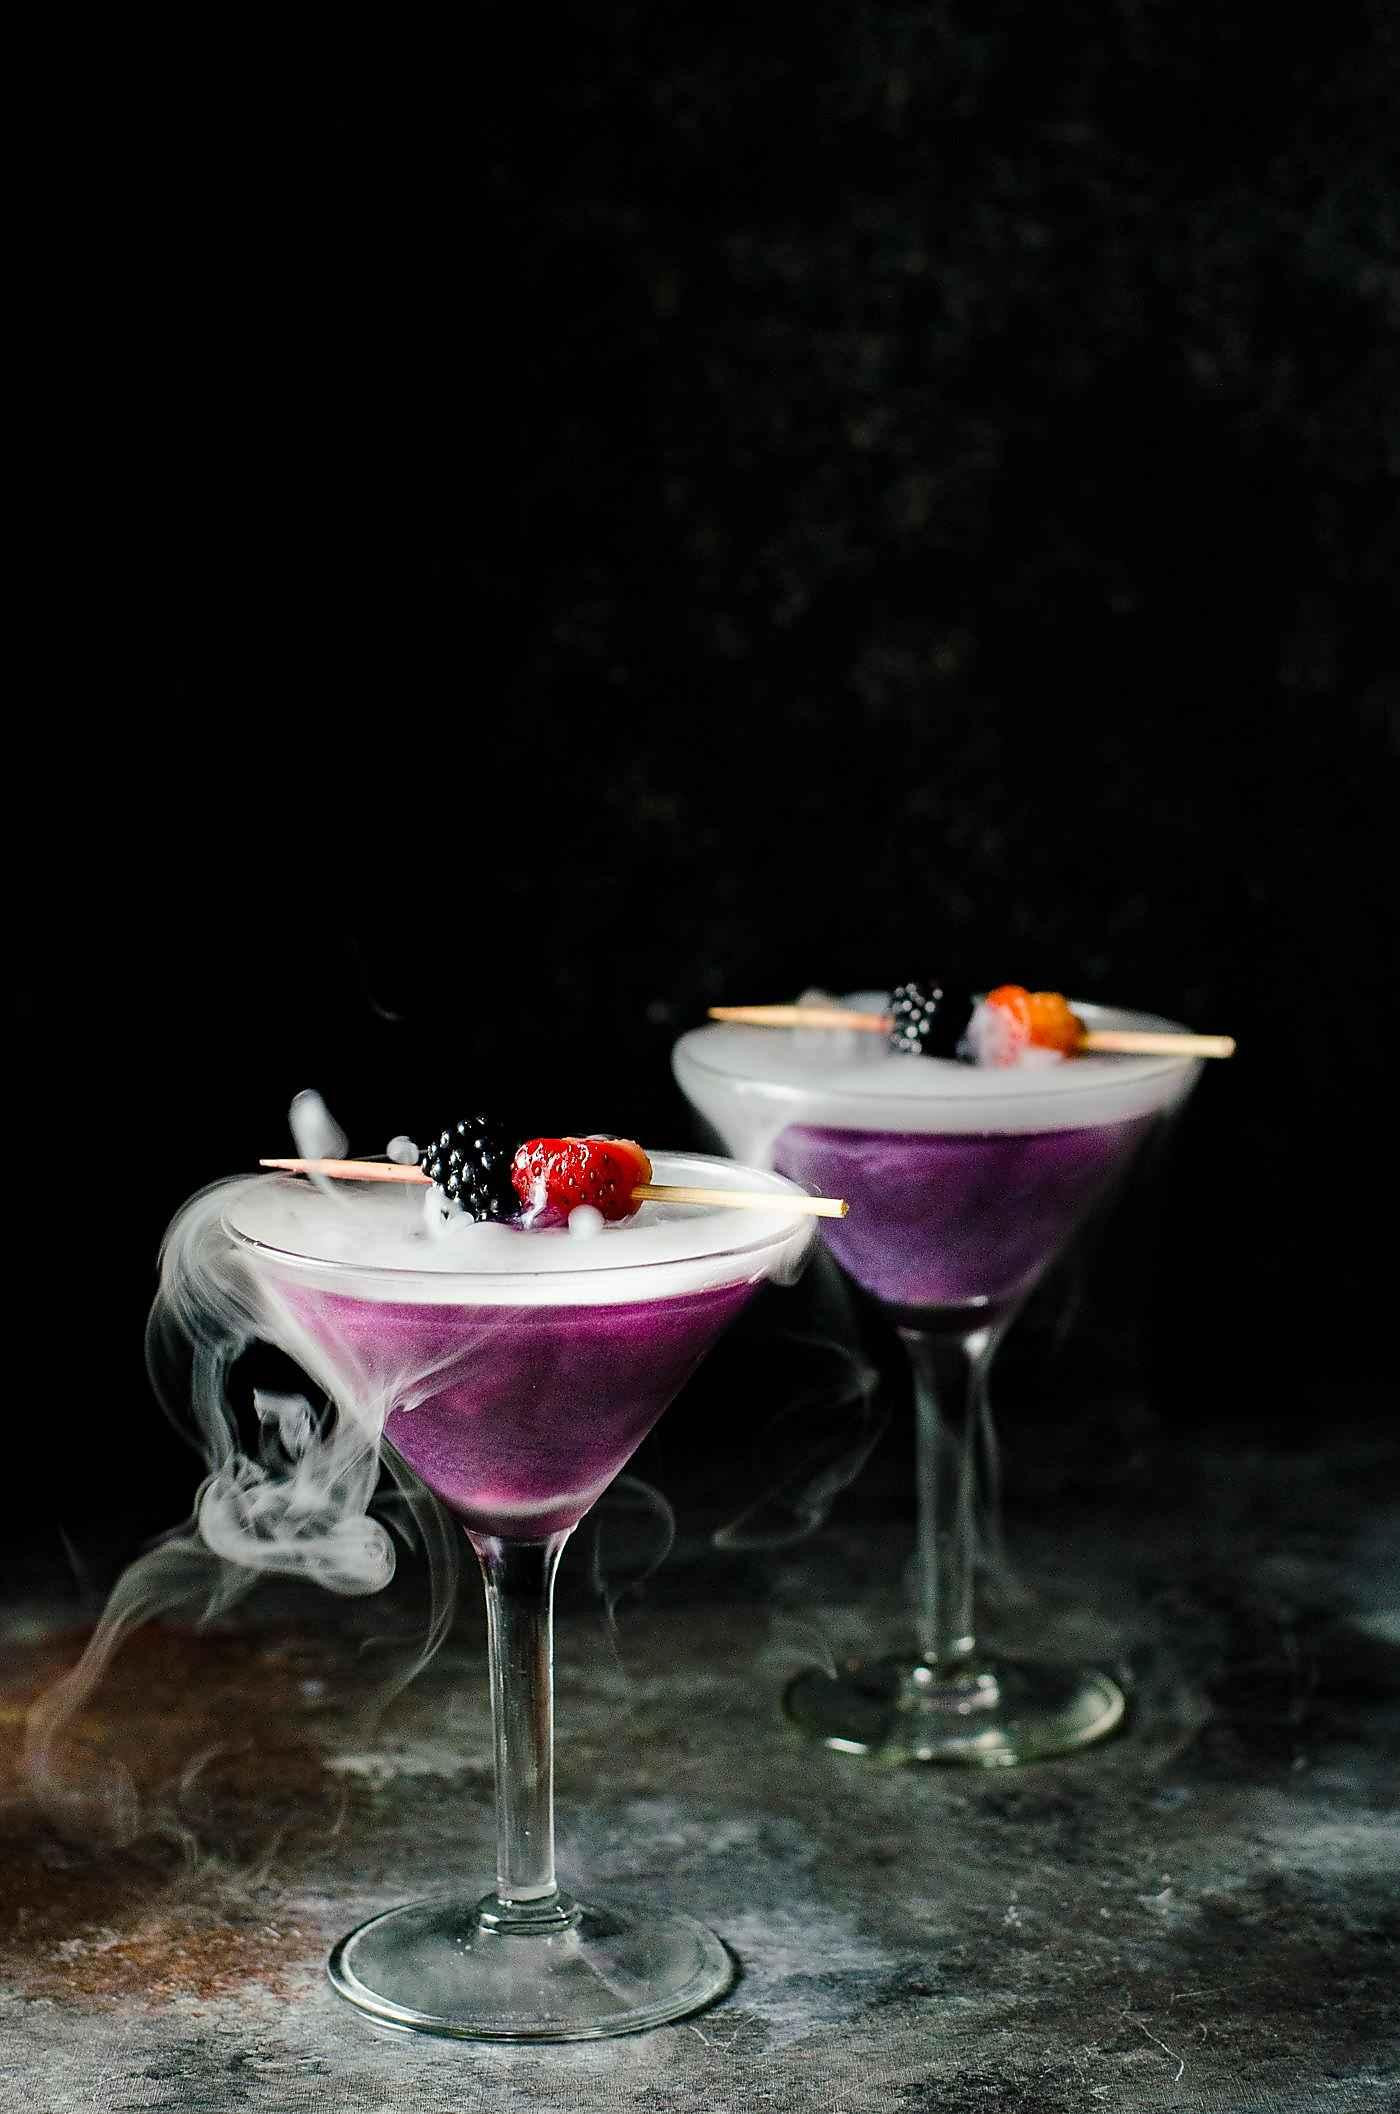 Halloween Alcohol Drinks
 17 Halloween Cocktail Recipes that are Spooktacular An